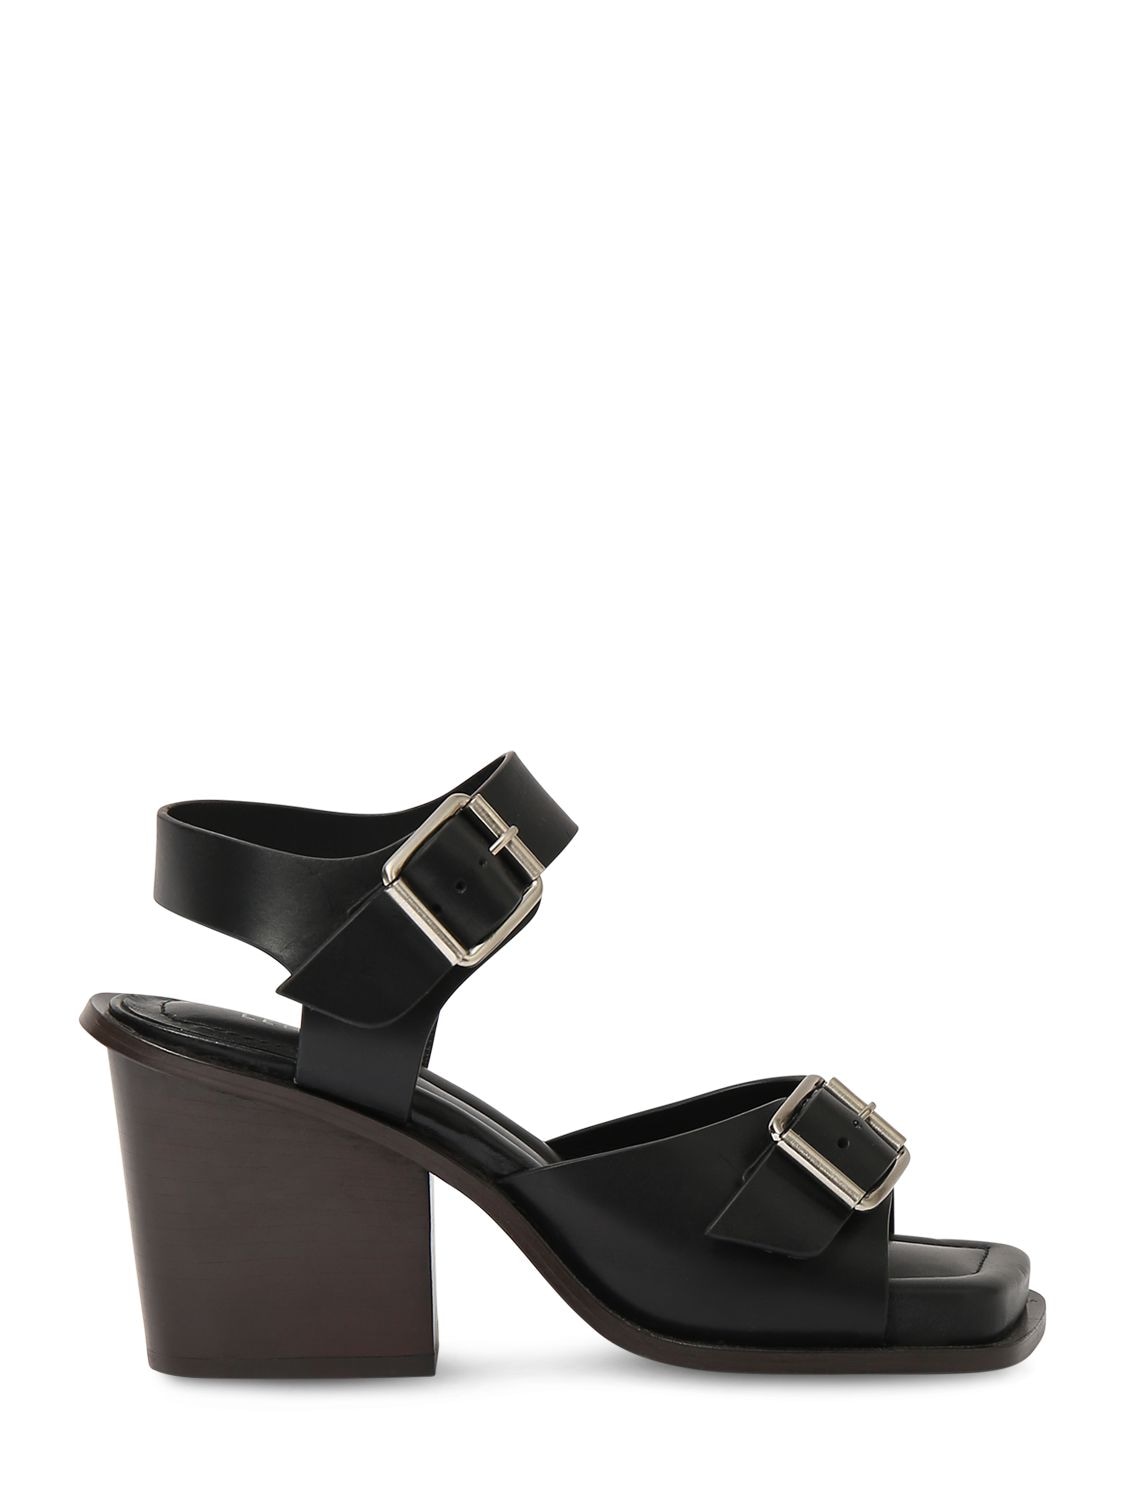 Lemaire 80mm Square Heeled Sandals W/ Straps In Black